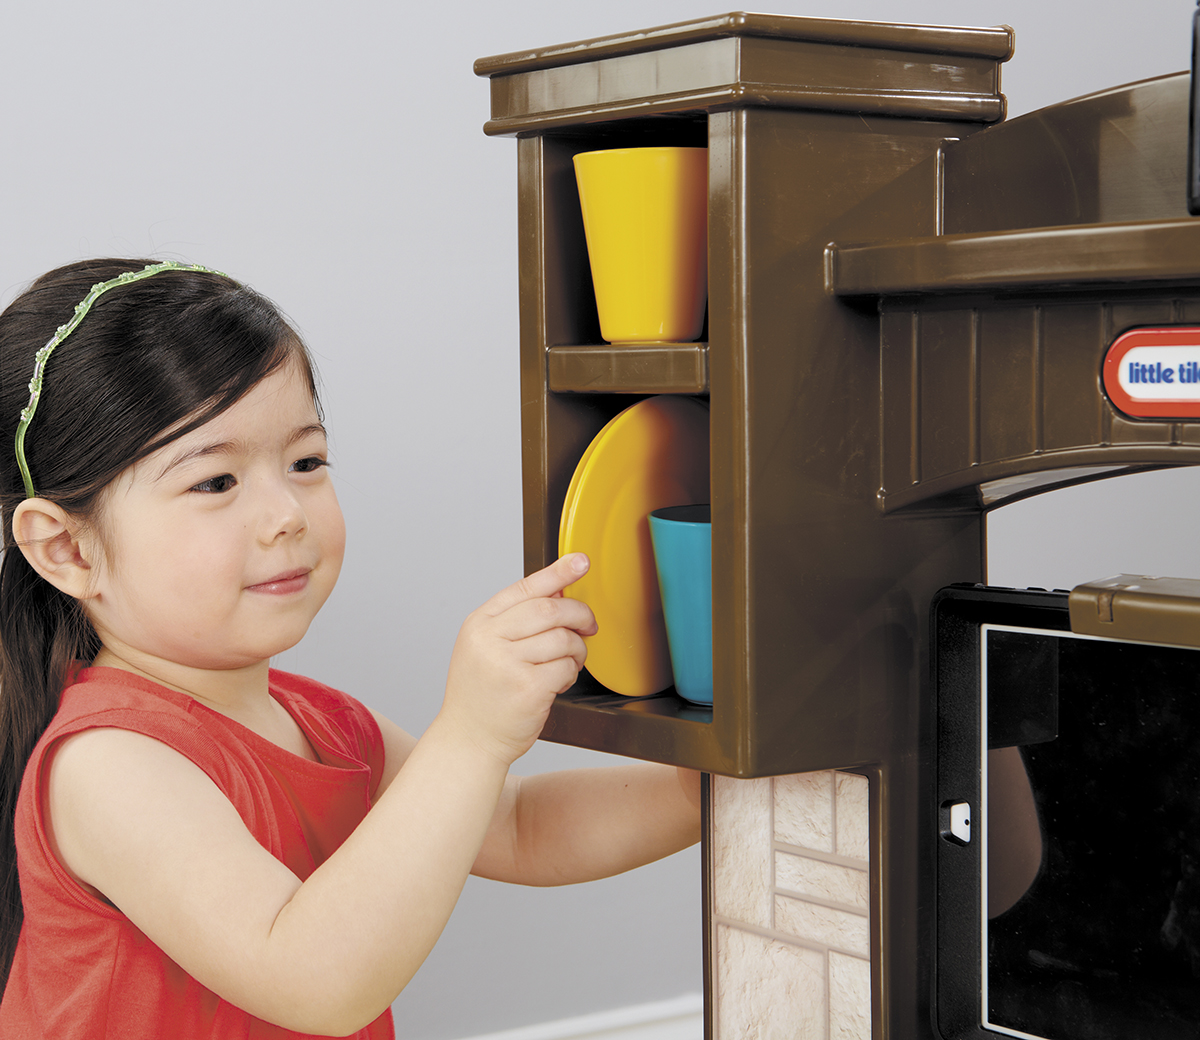 little tikes smart kitchen not connecting